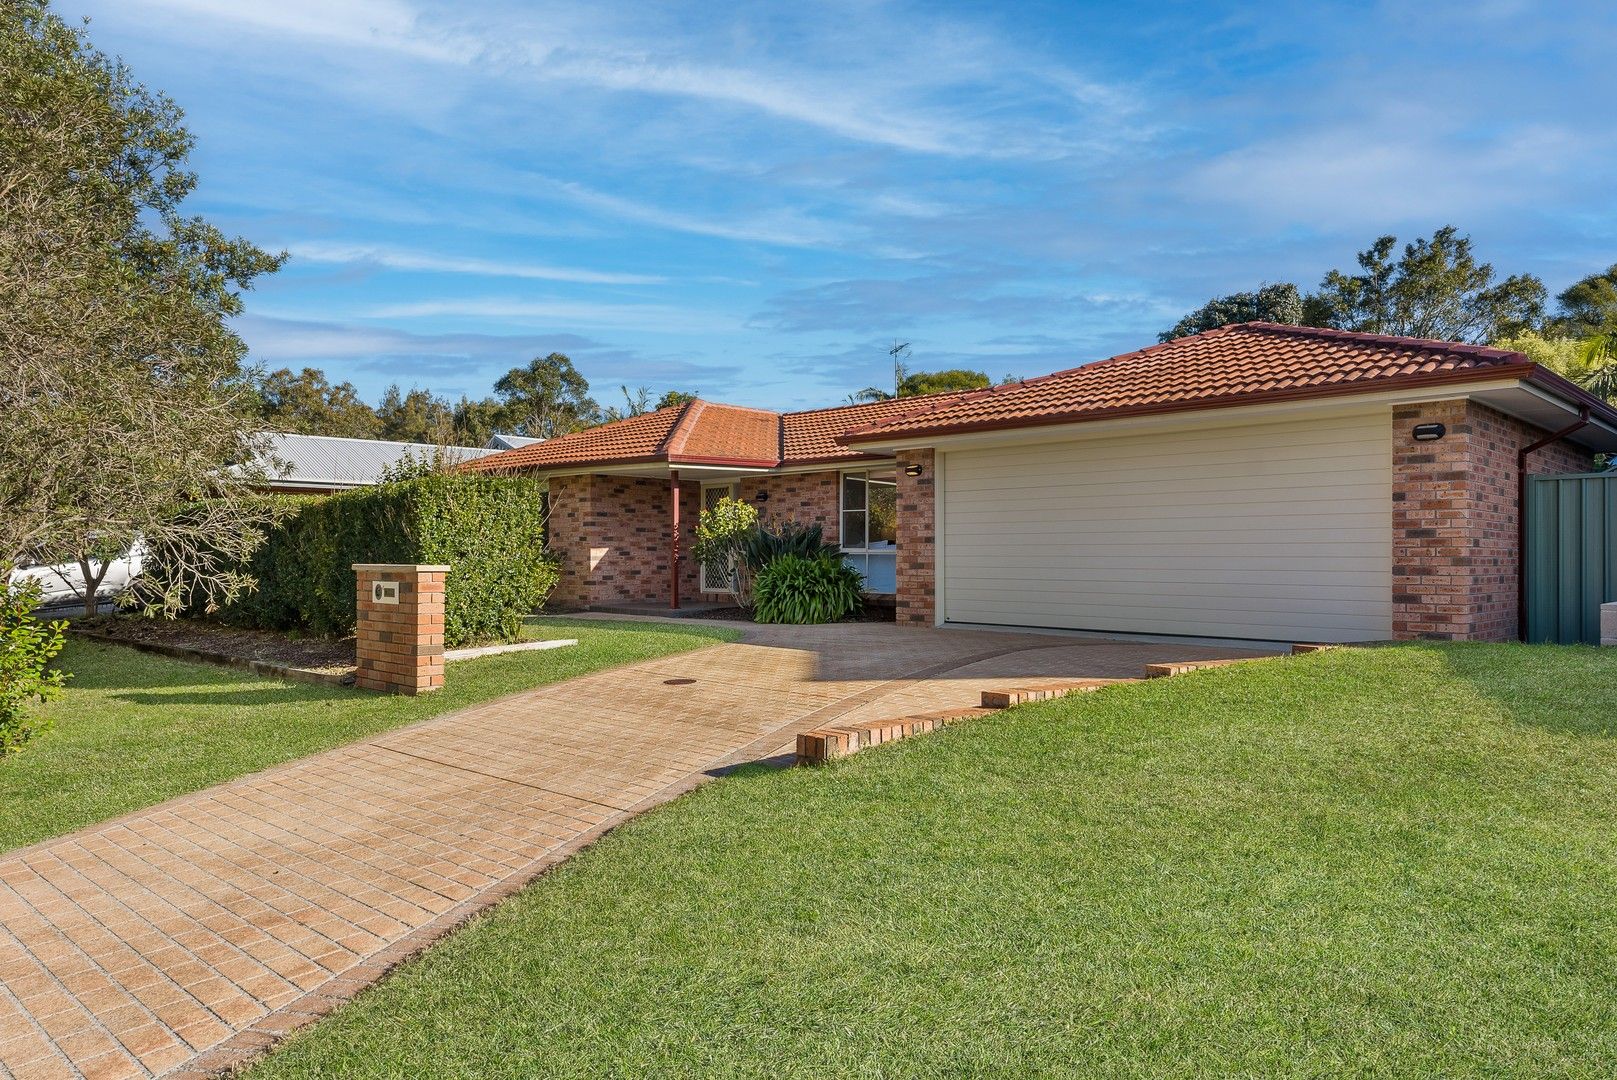 4 bedrooms Acreage / Semi-Rural in 4 Kinnellson Place HELENSBURGH NSW, 2508